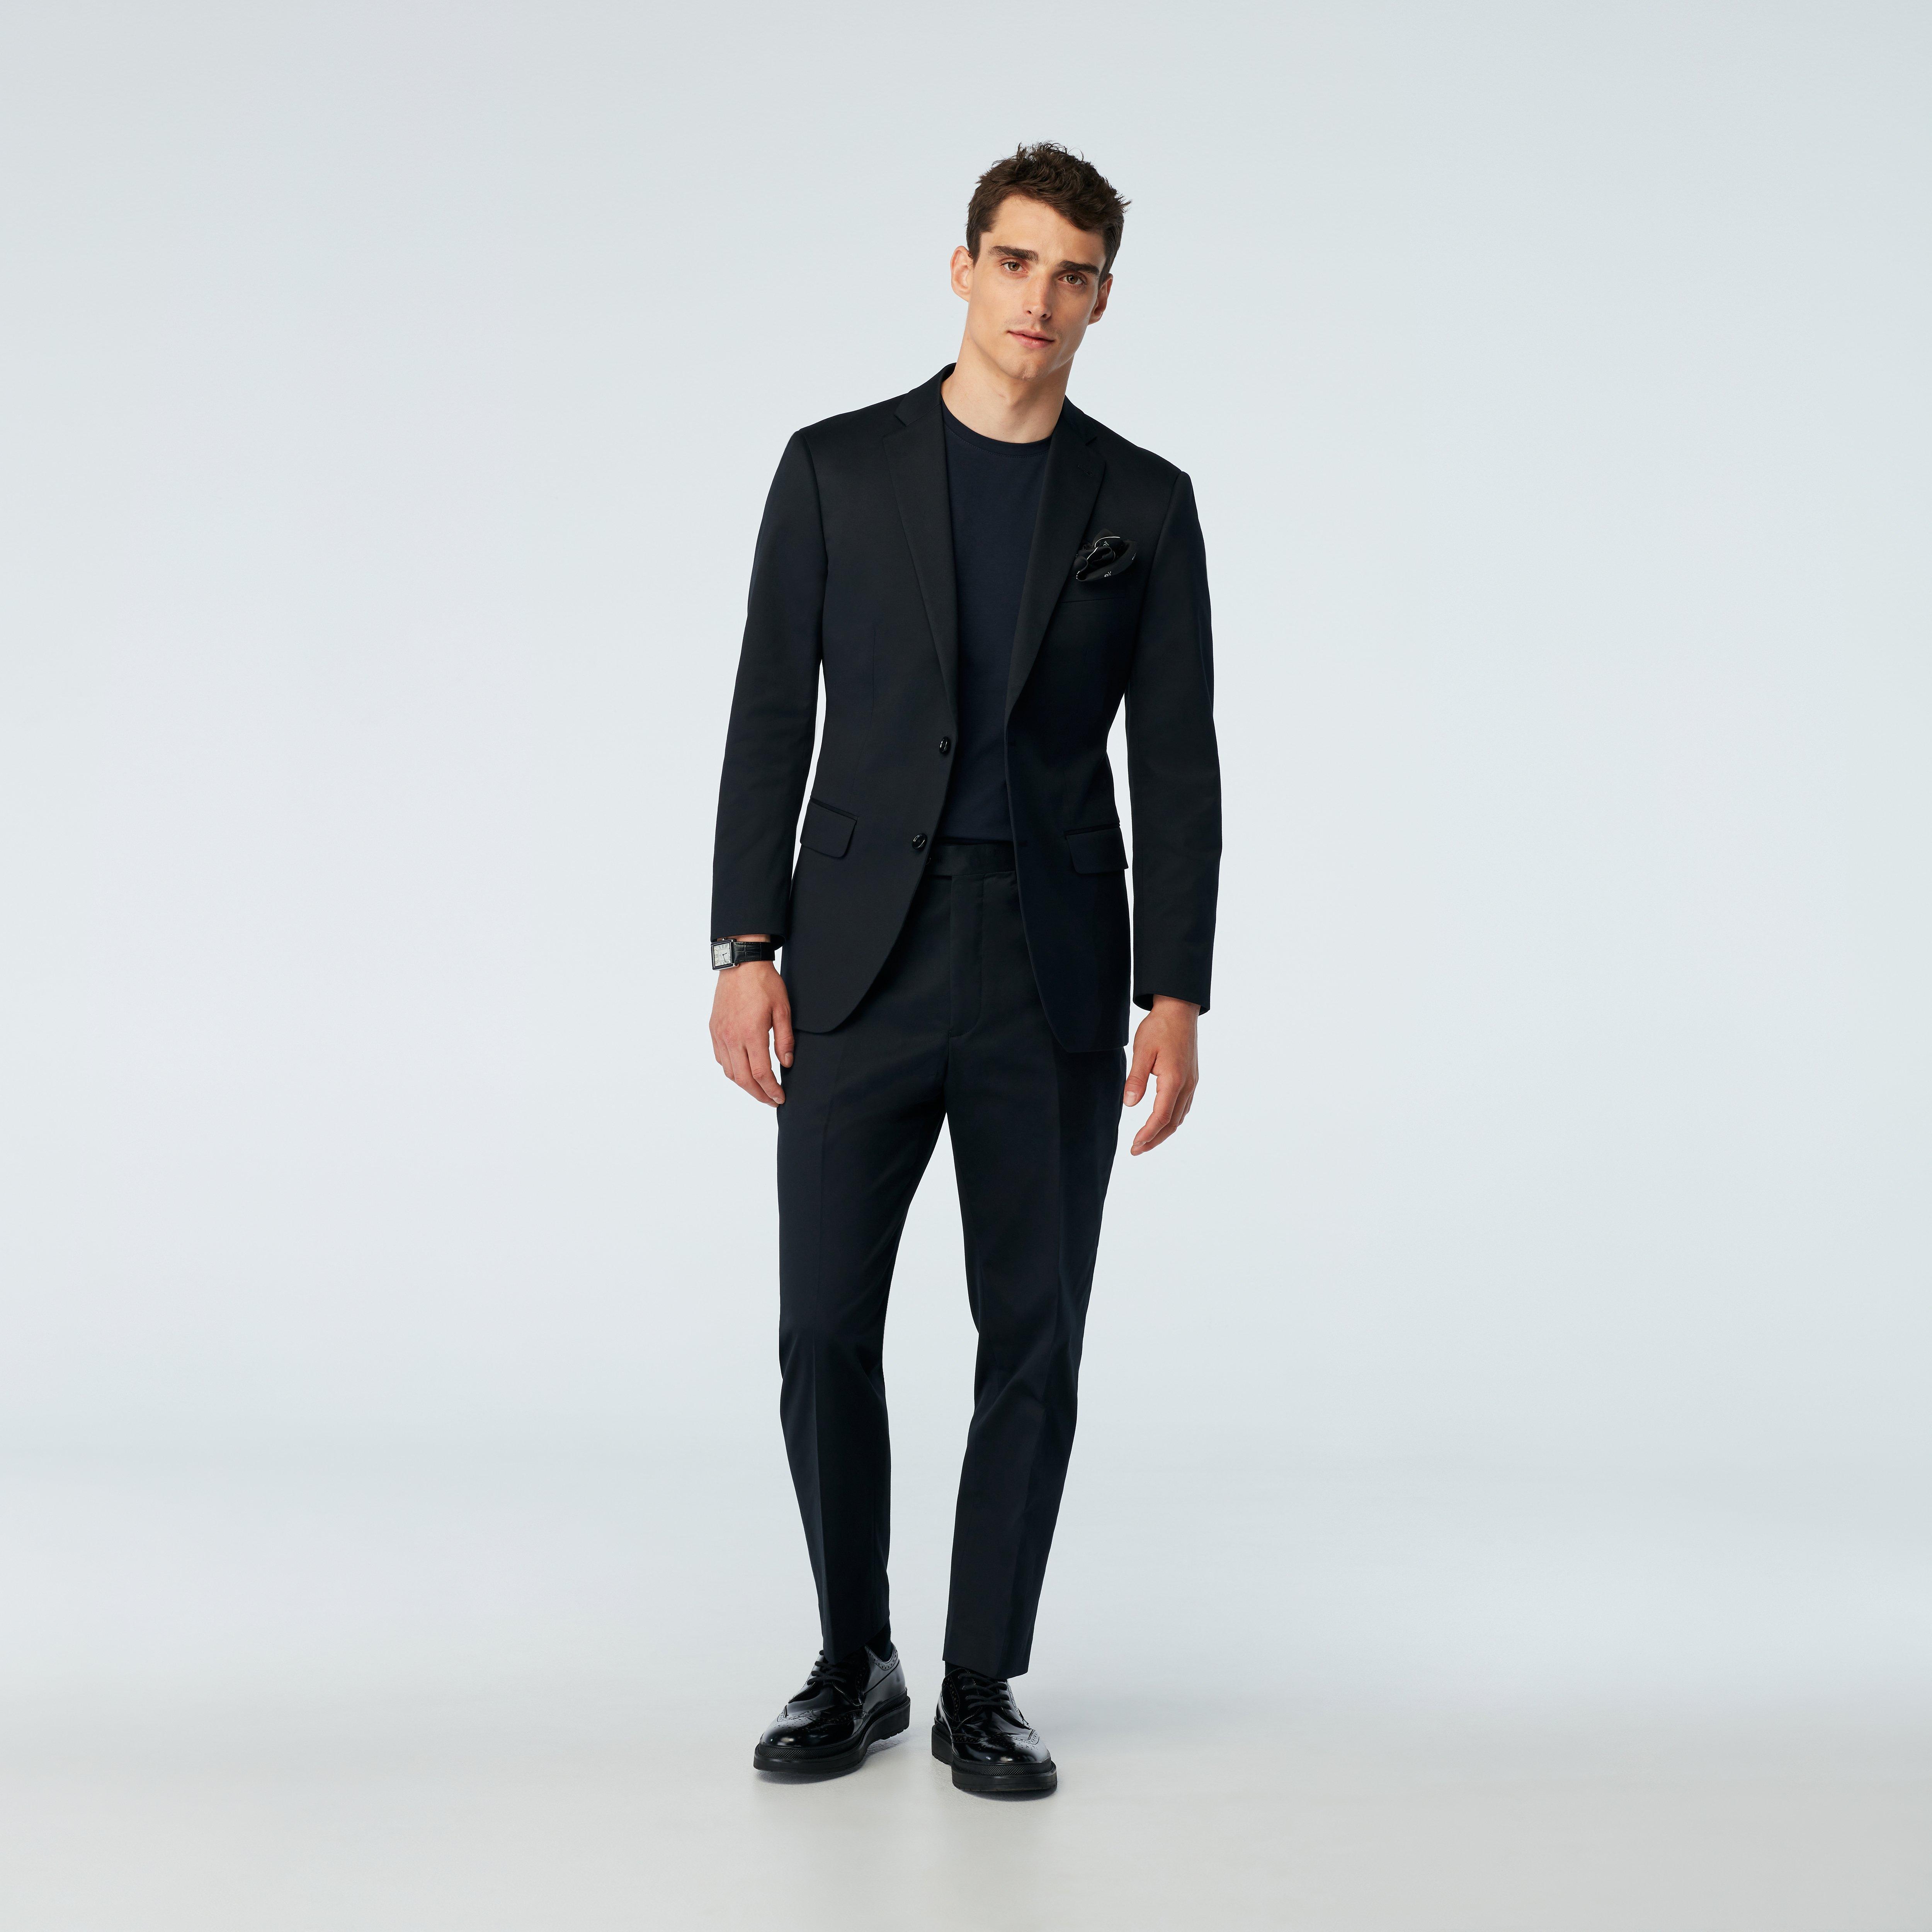 Men's Custom Suits - Hartley Cotton Stretch Black Suit | INDOCHINO